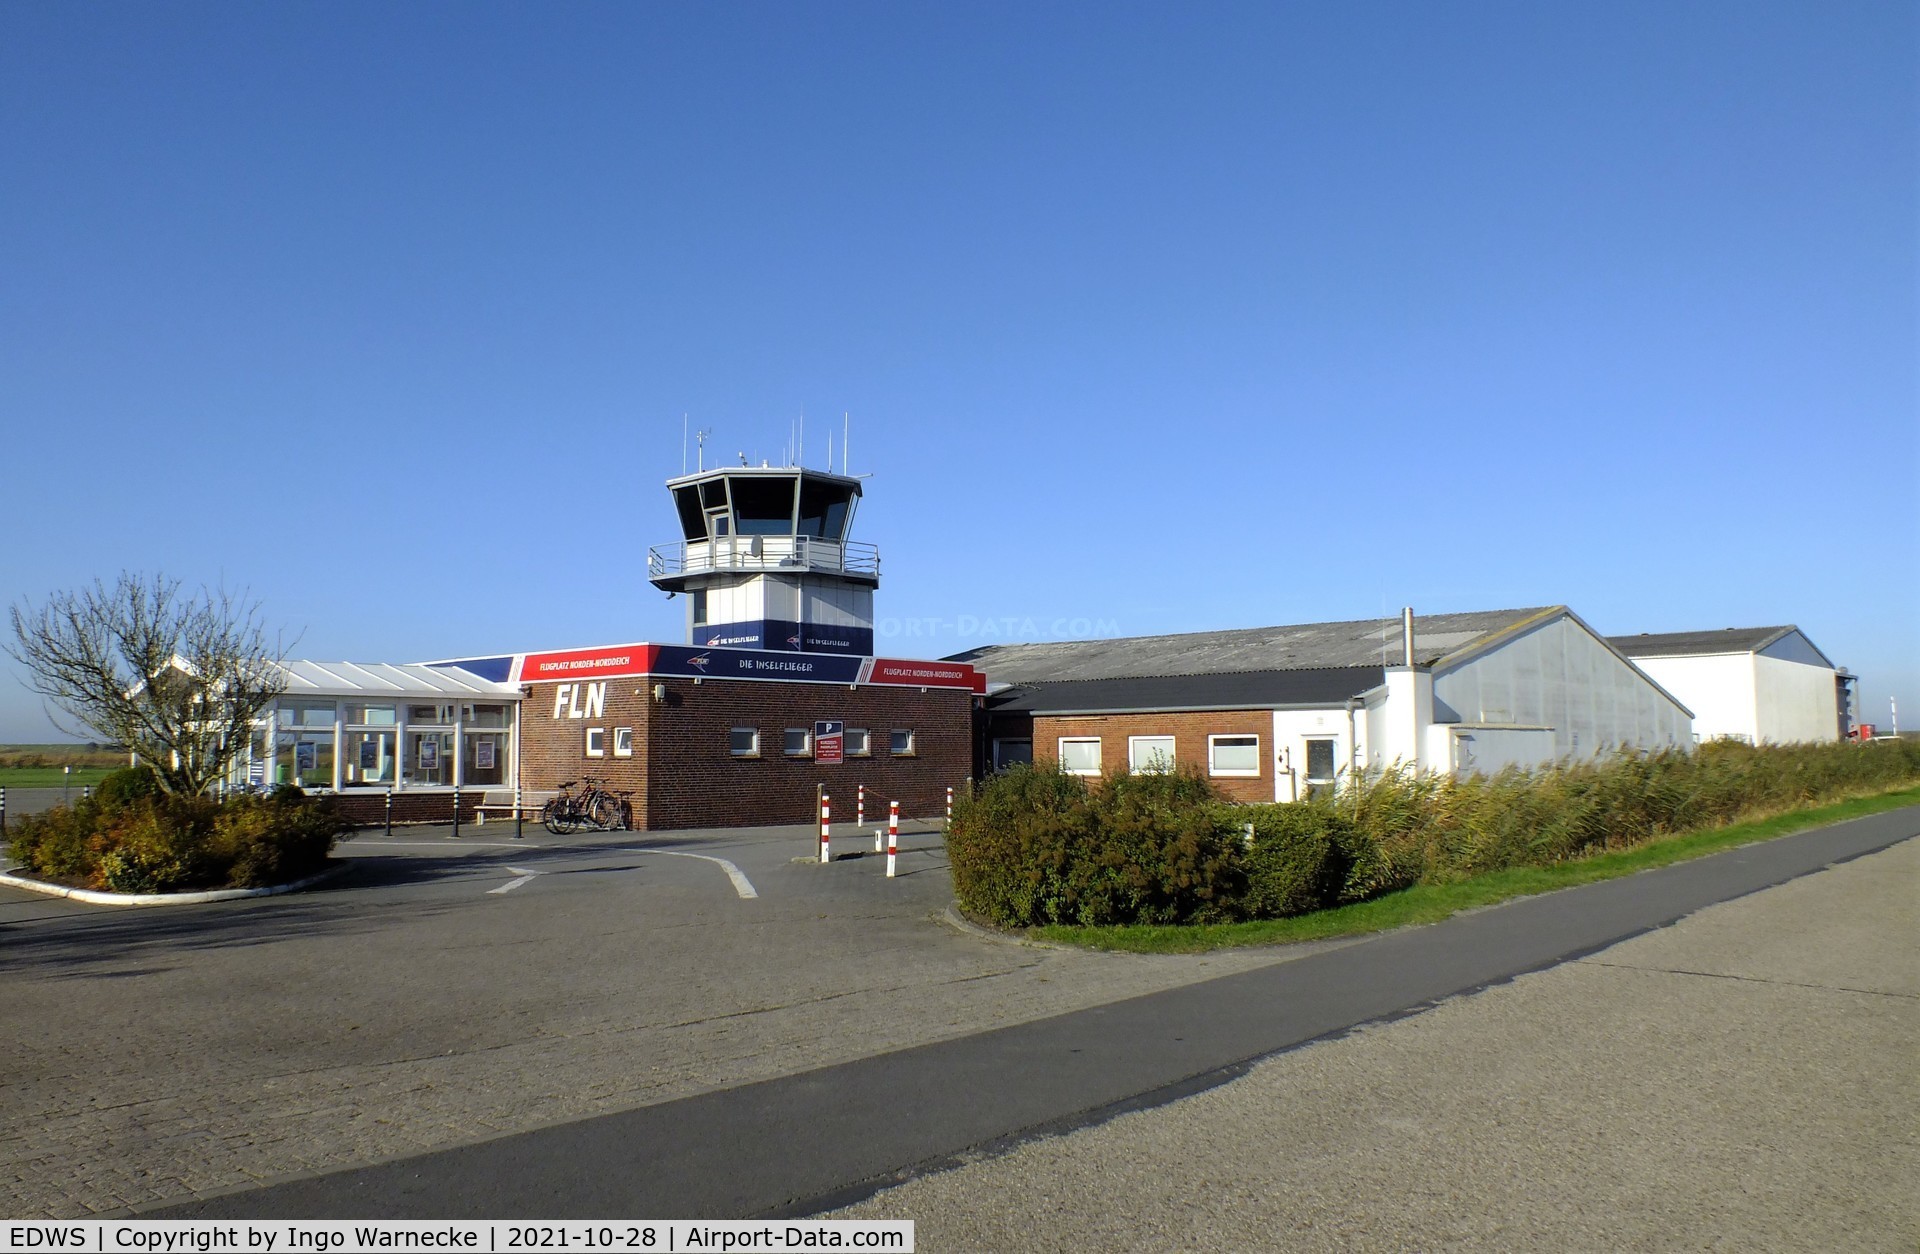 EDWS Airport - Norden-Norddeich airfield terminal, tower and hangars